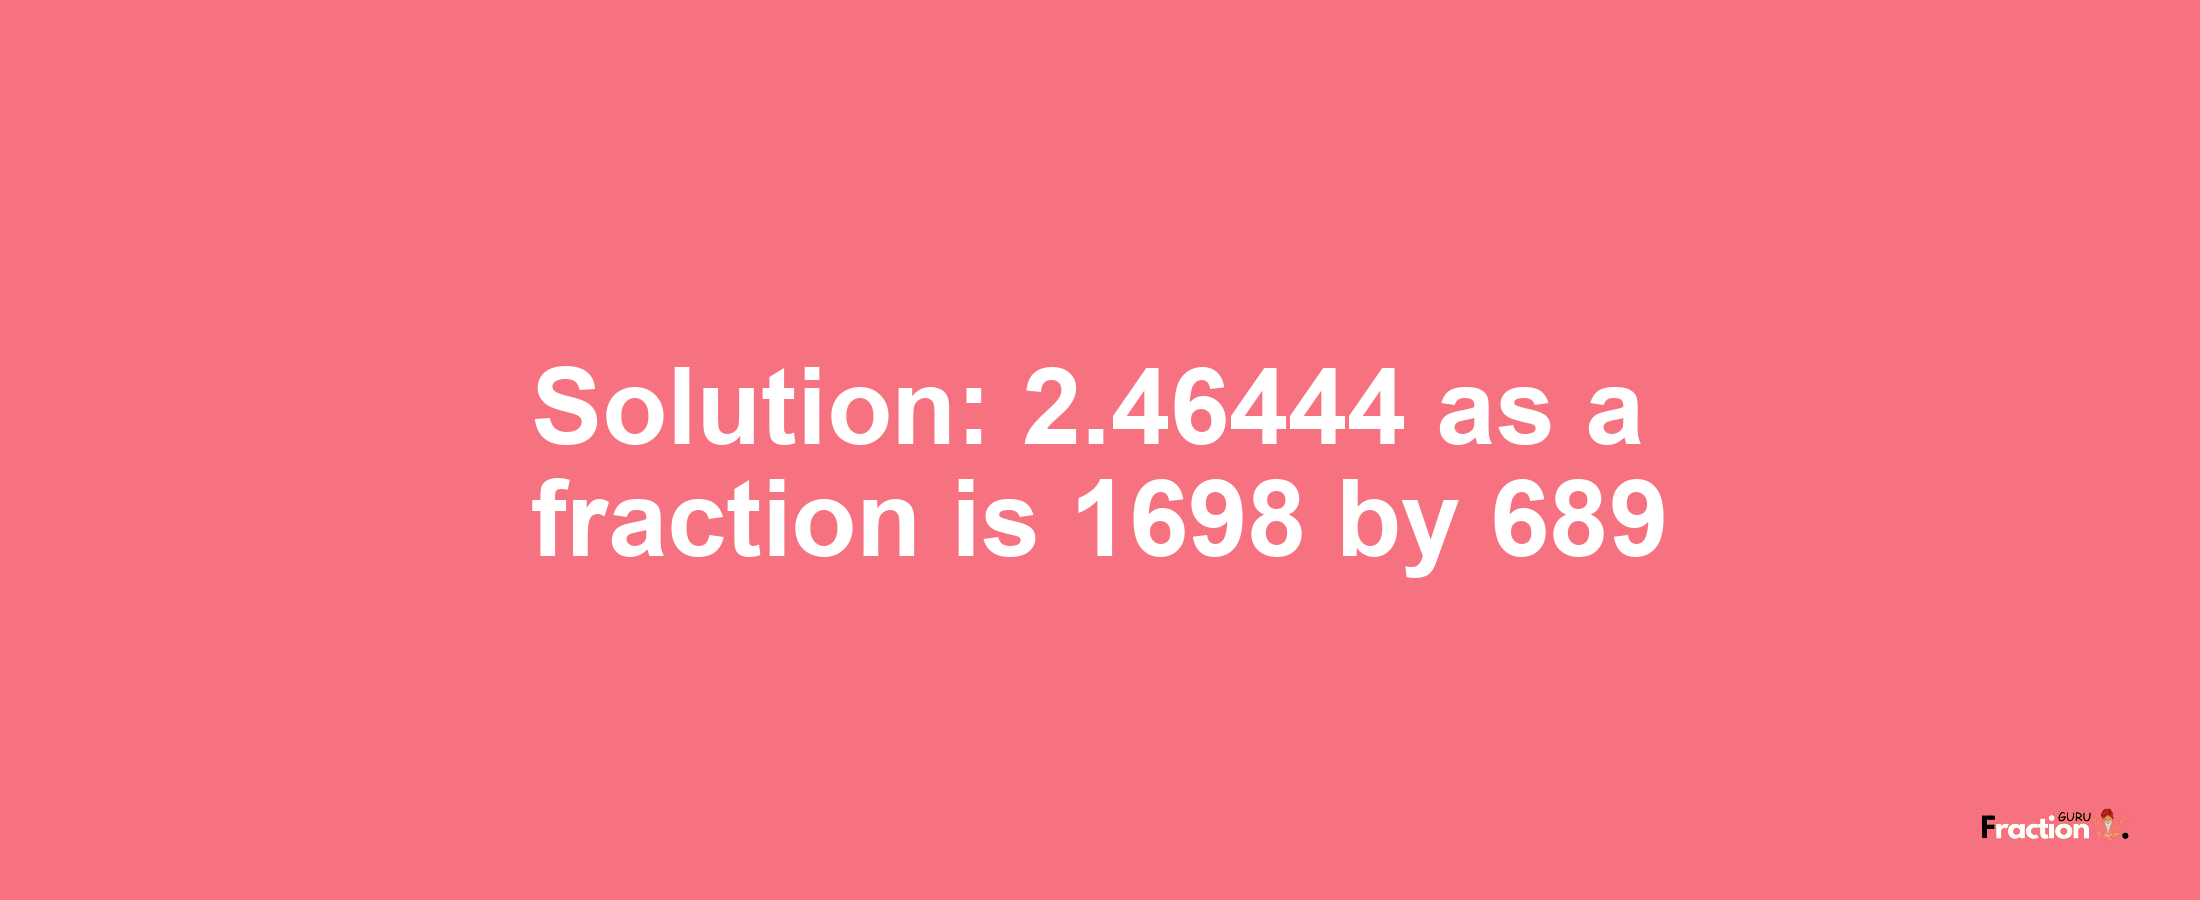 Solution:2.46444 as a fraction is 1698/689